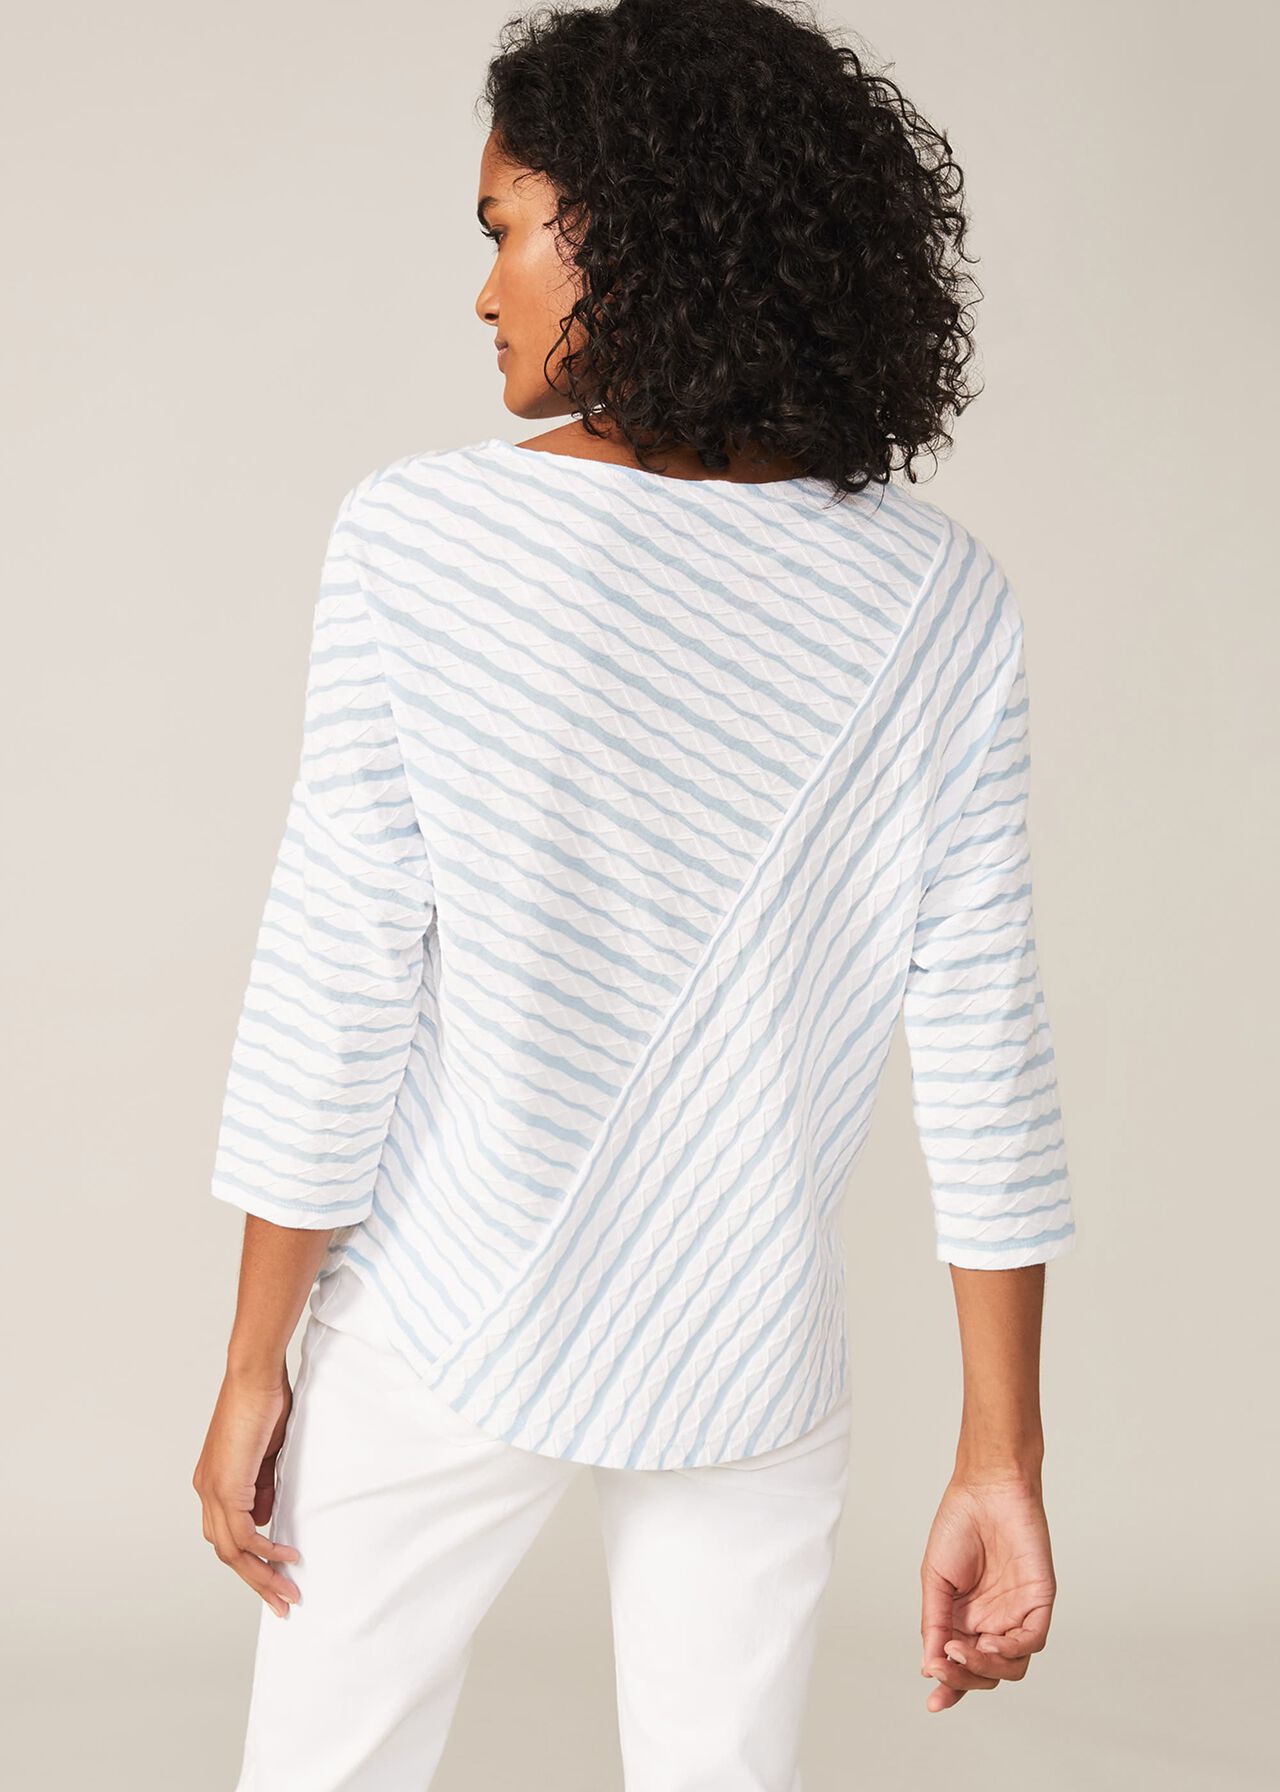 Tabby Cutabout Stripe Top